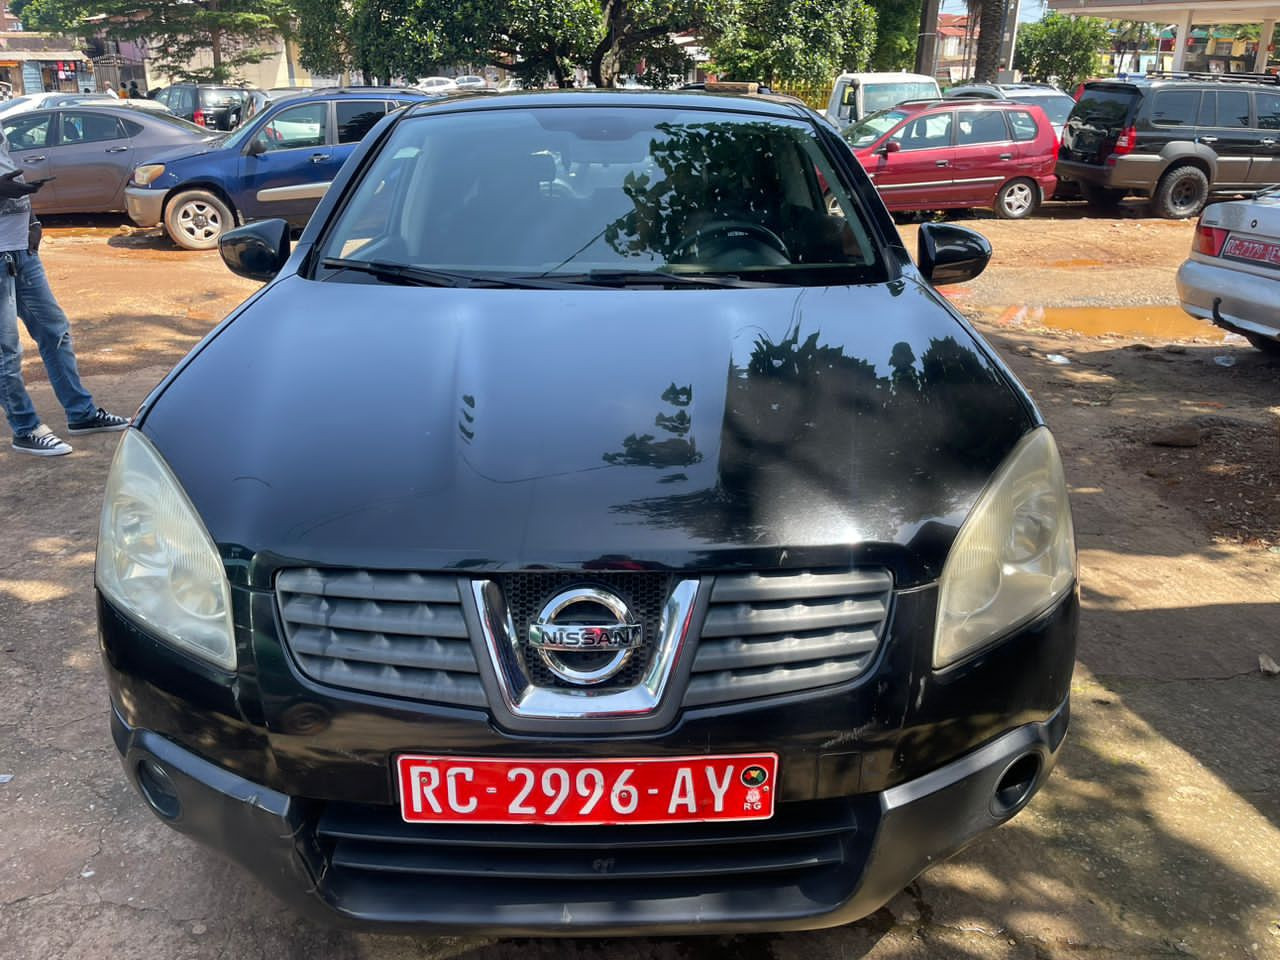 Nissan Qashqai, Voitures, Conakry